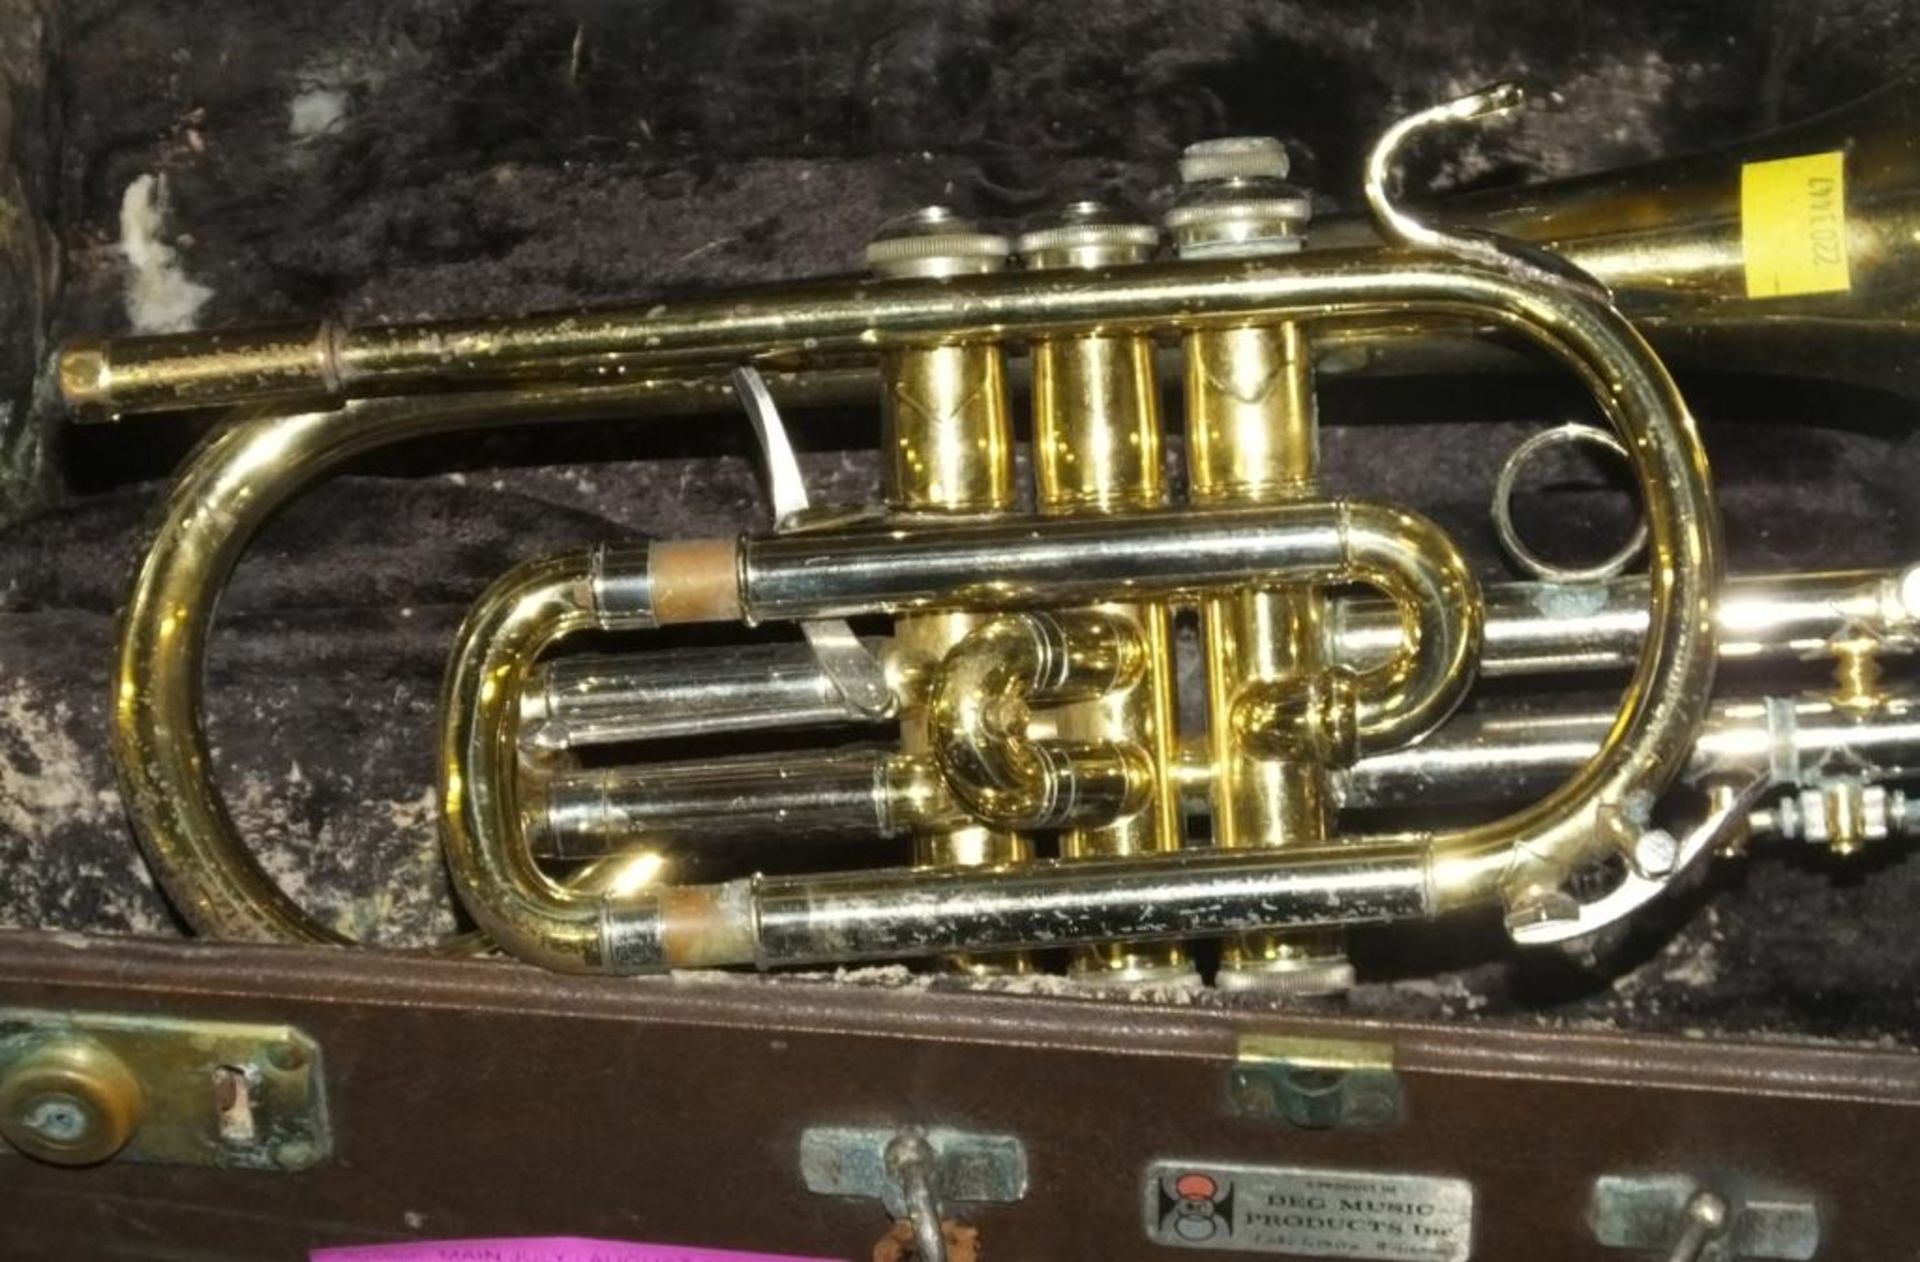 Bach Stradivrius 184 Cornet - Cased in need of repair - Image 2 of 3